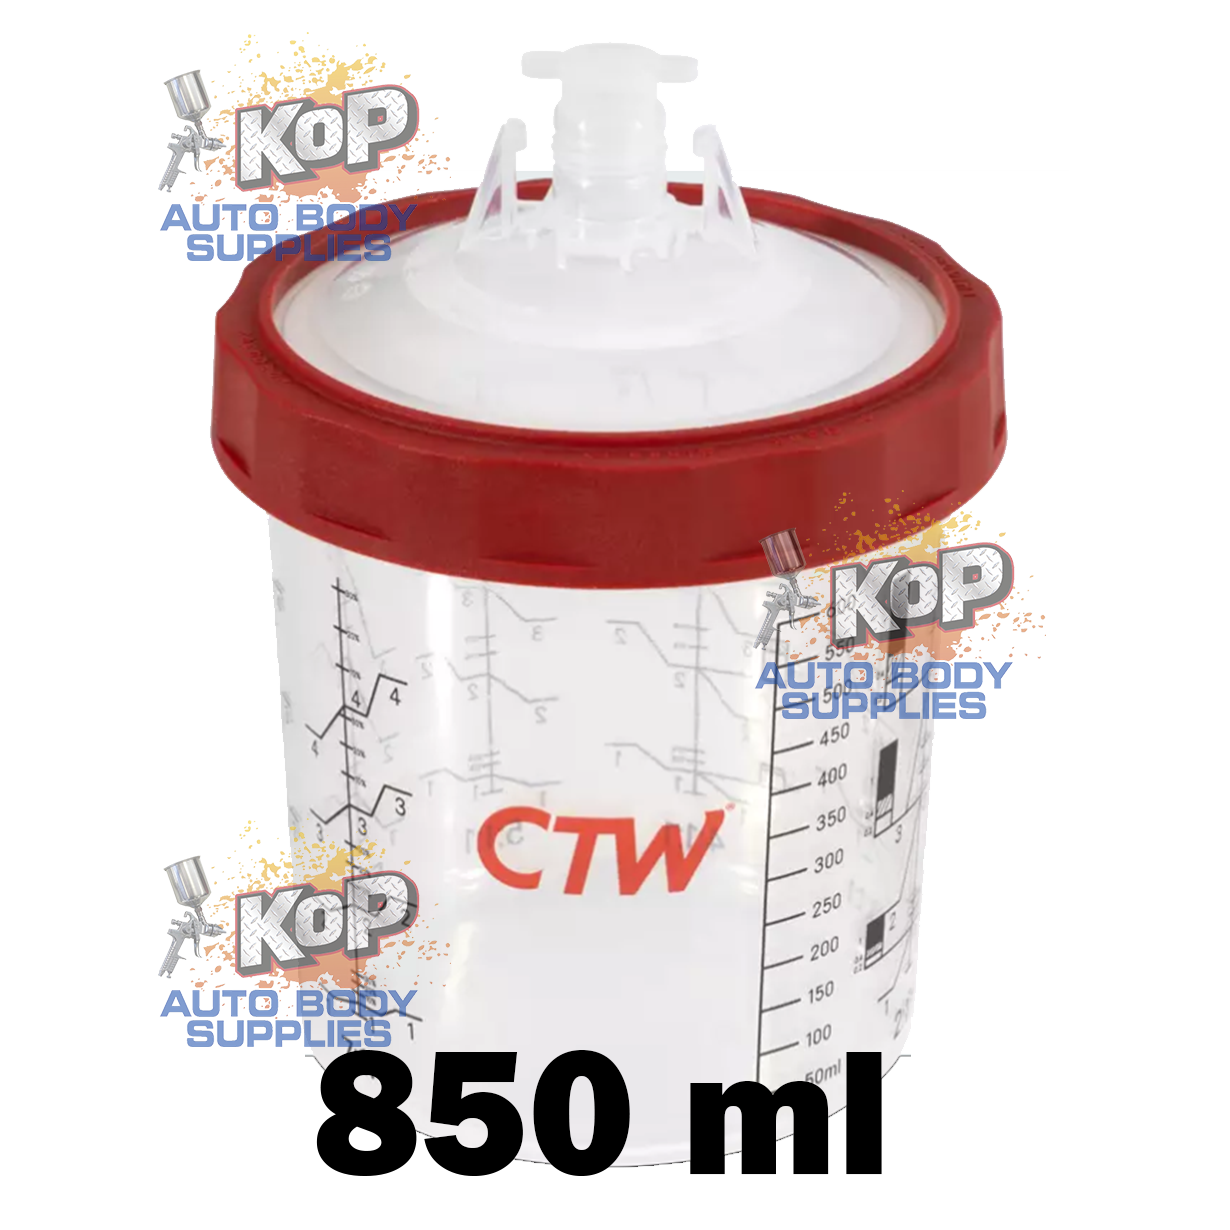 CTW 850 PPS Paint Lids and Liners - KOP Auto Body Supplies